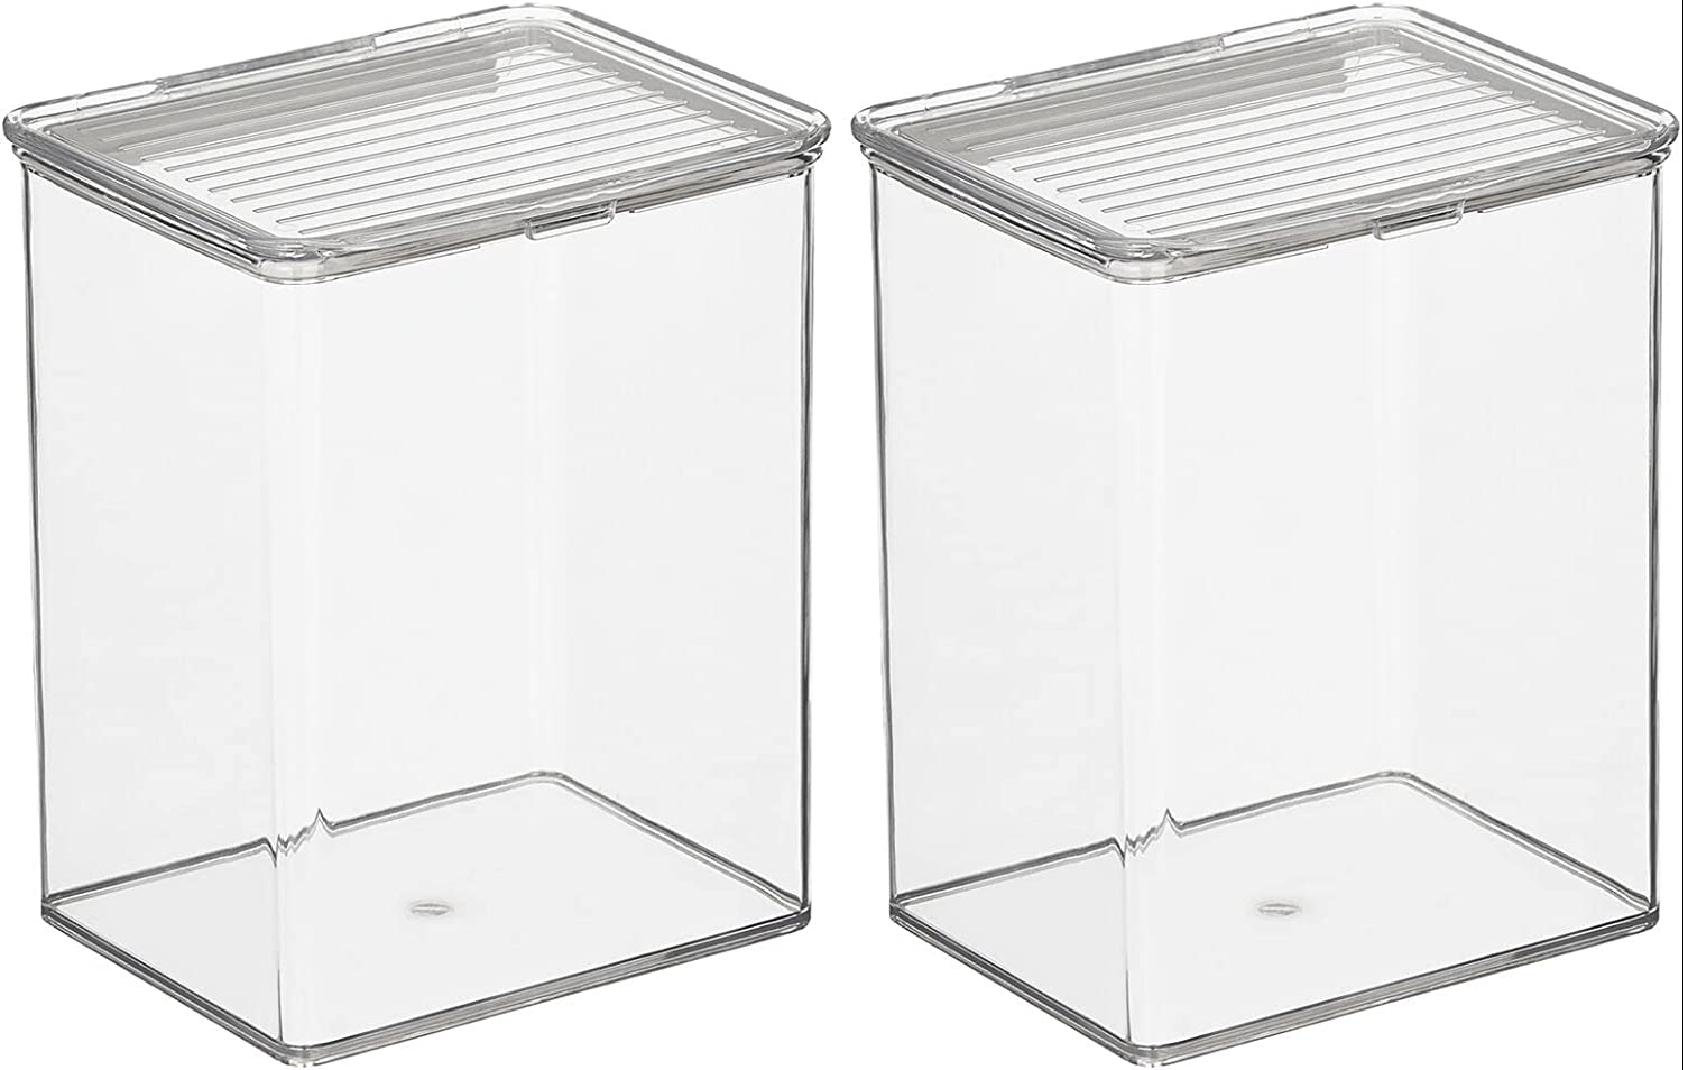 Chef's Path Airtight Food Storage Containers 1.5L (Set of 6) for Kitchen &  Pantry Organization - Clear Plastic Canisters for Cookies, Herbs, Spices